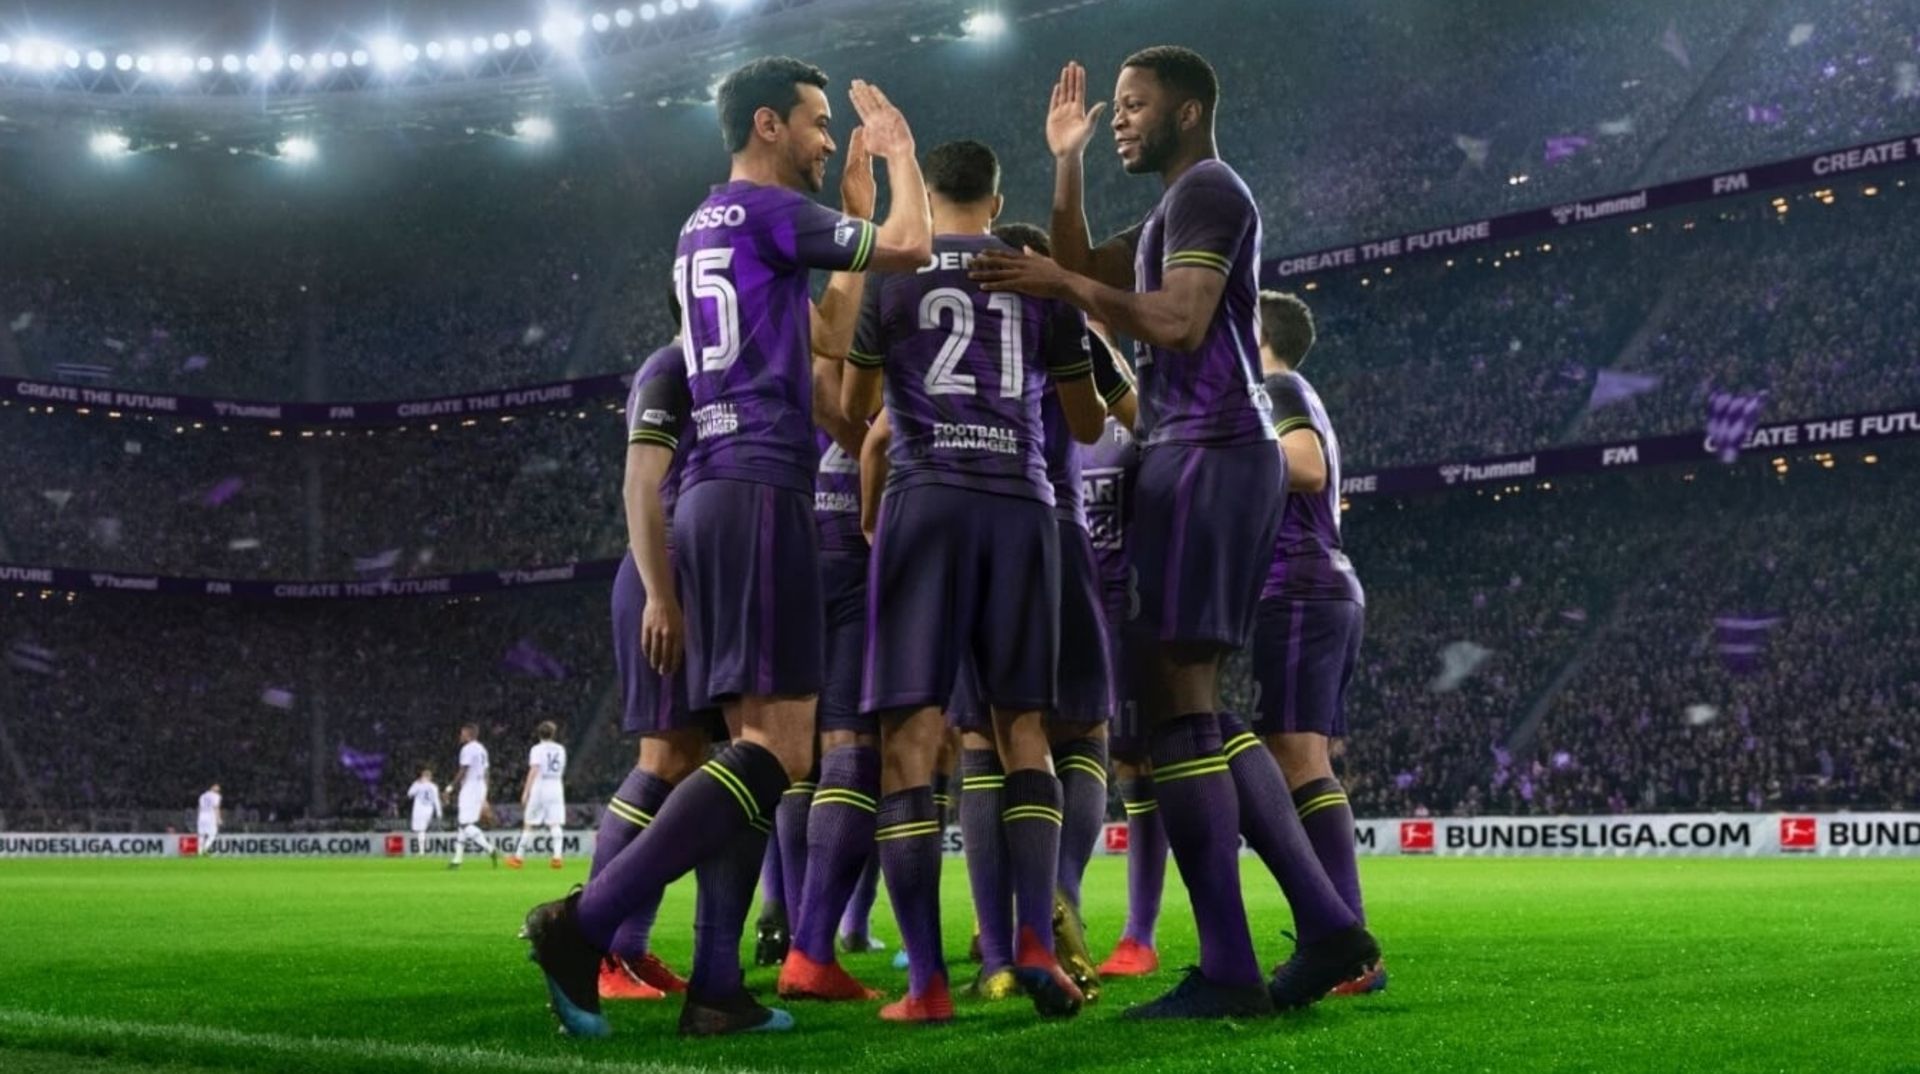 Football Manager 2021 Xbox Edition Review (Xbox Series) - X(box)s and Os